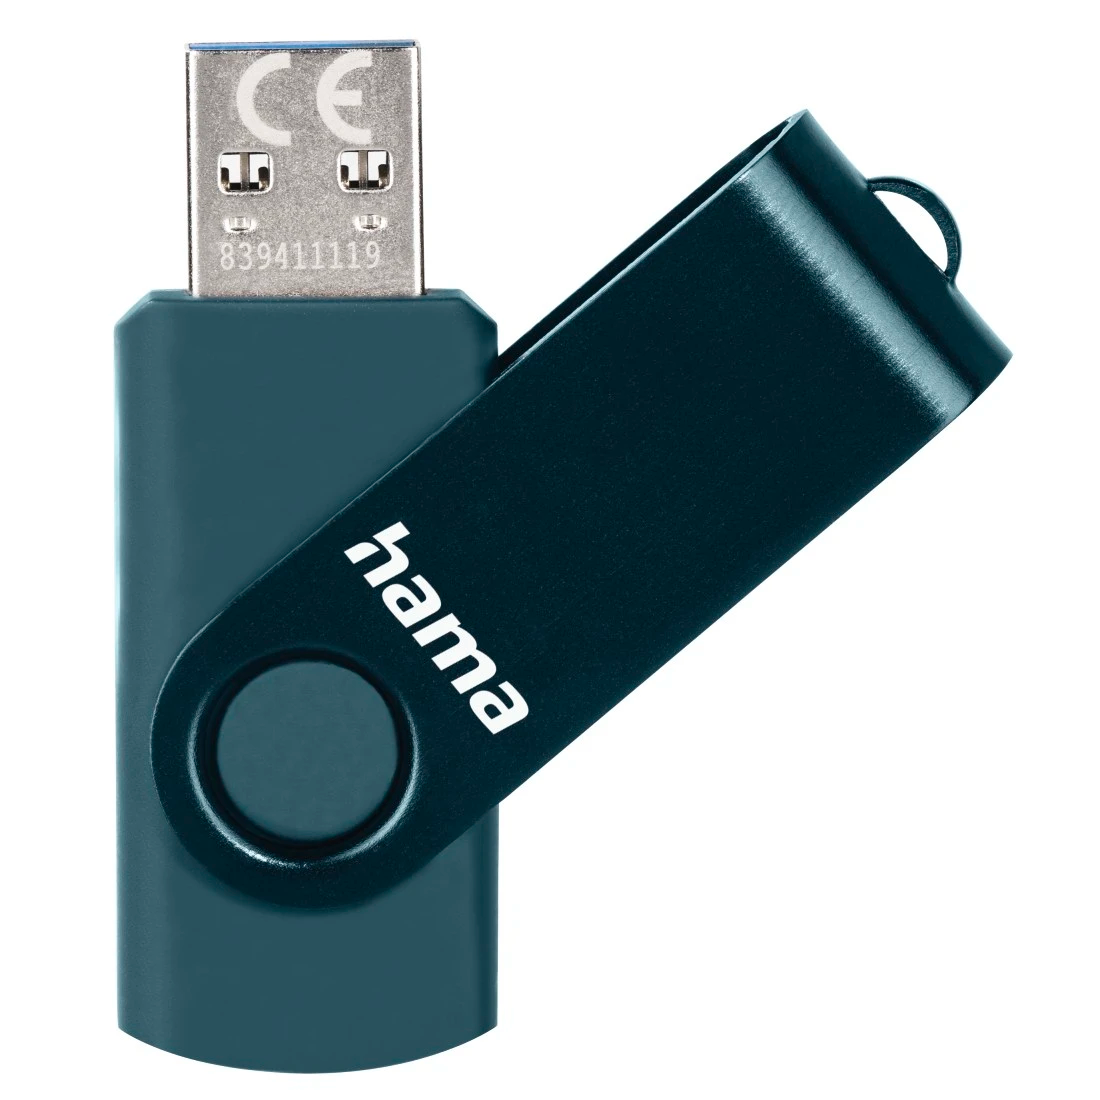 Hama Rotate USB 3.0 70MB/s 32GB USB Memory Stick - Blue | 435835 from Hama - DID Electrical